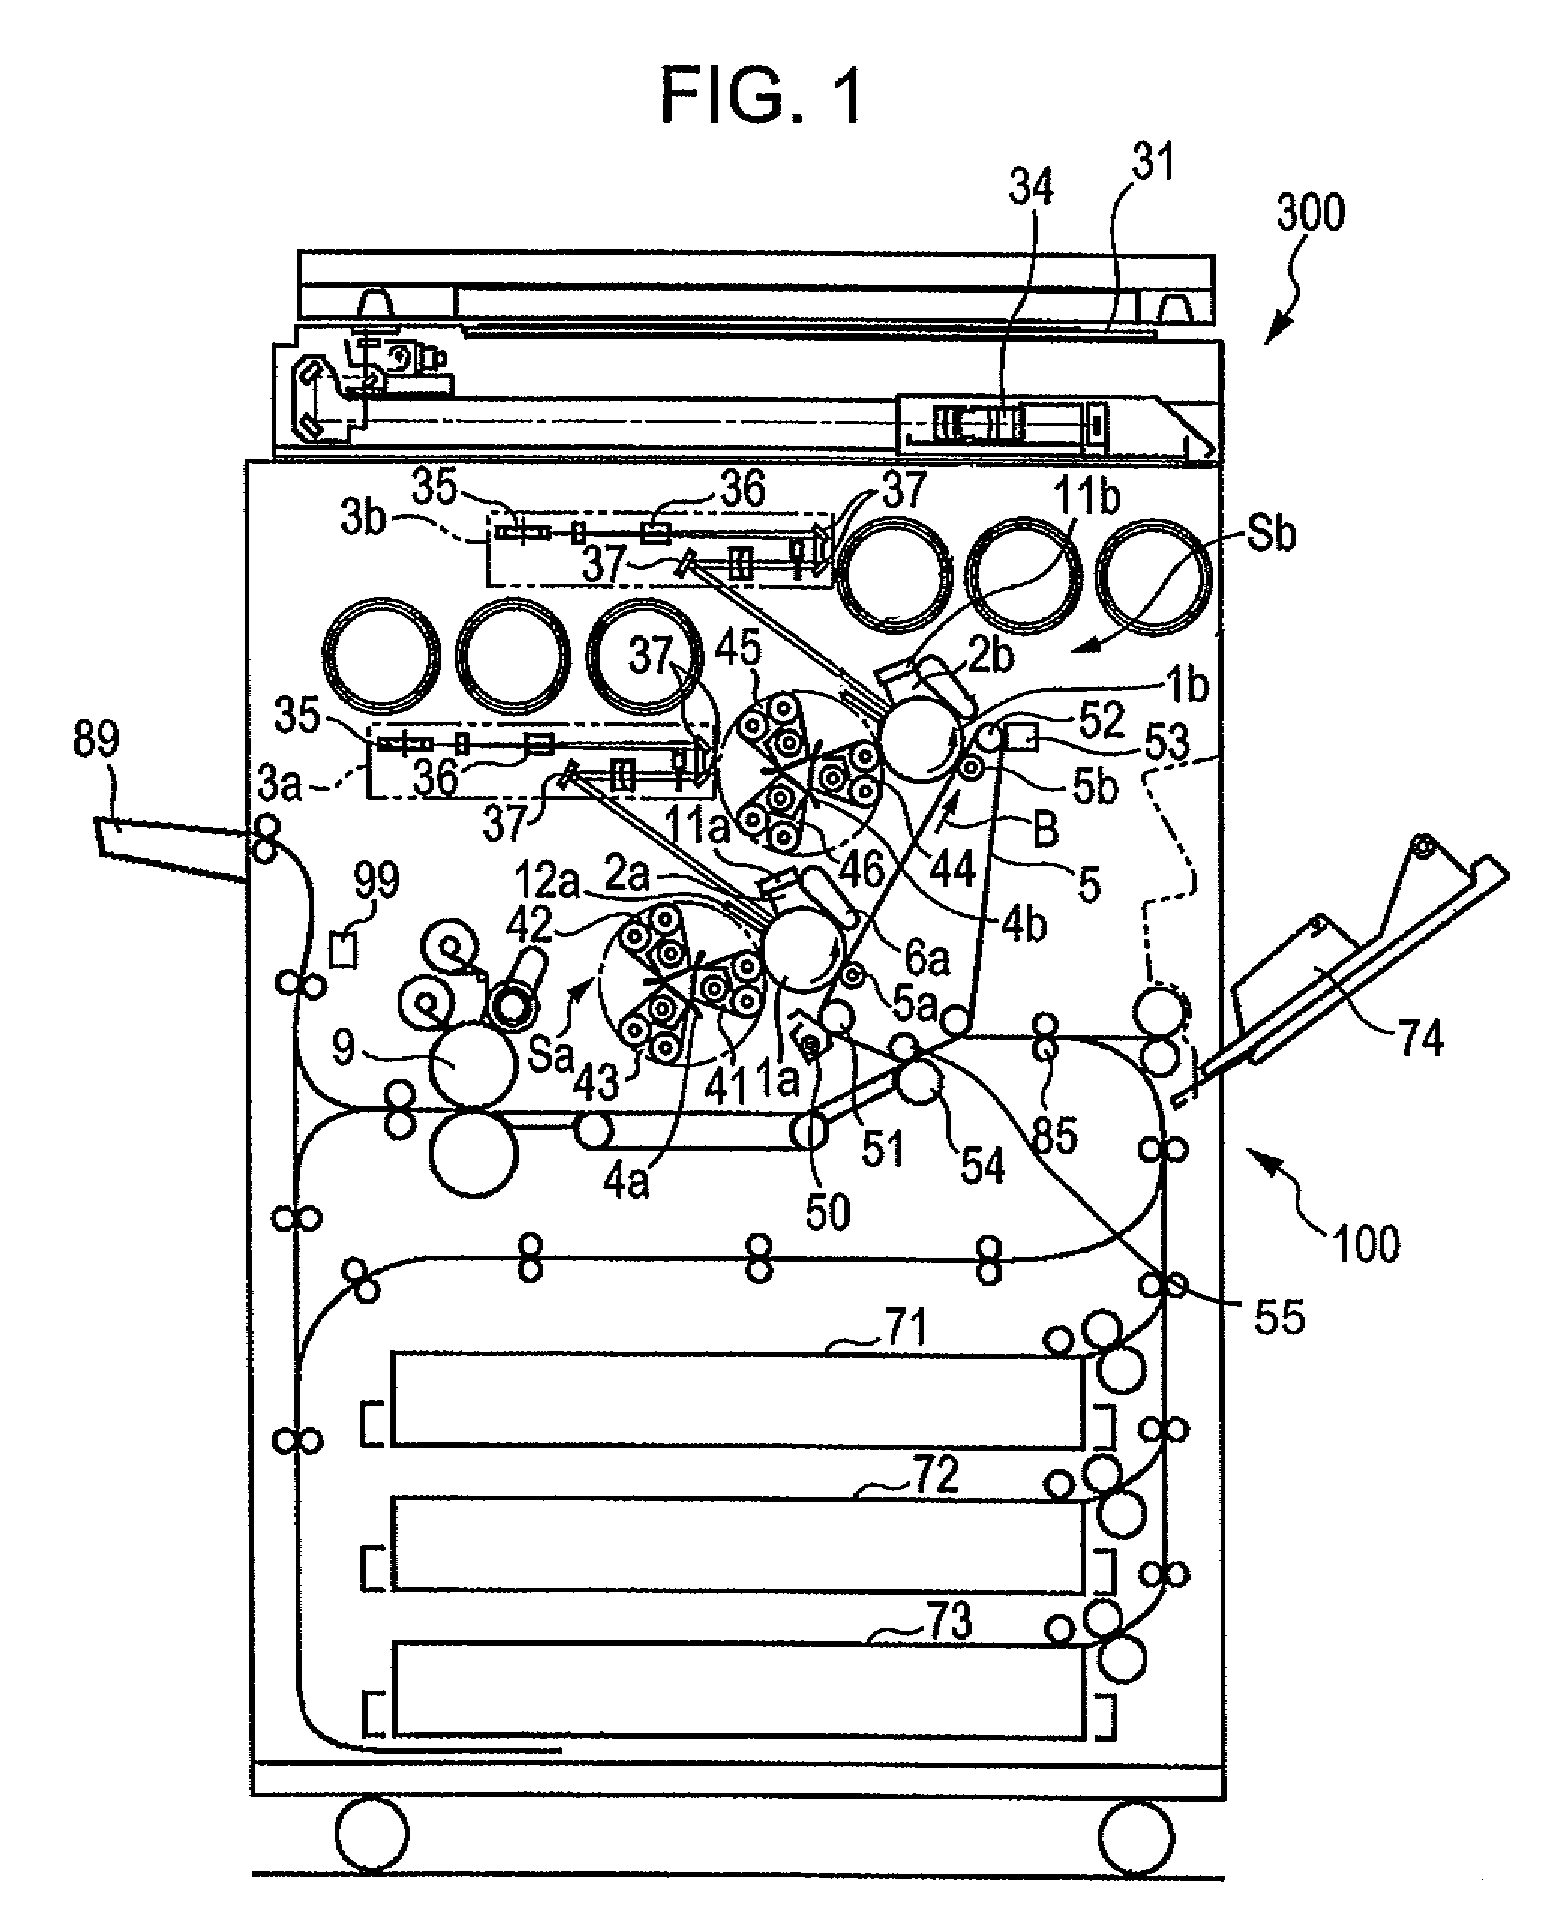 Image-forming apparatus and image-forming method for making development using light toner and dark toner with substantially the same hue